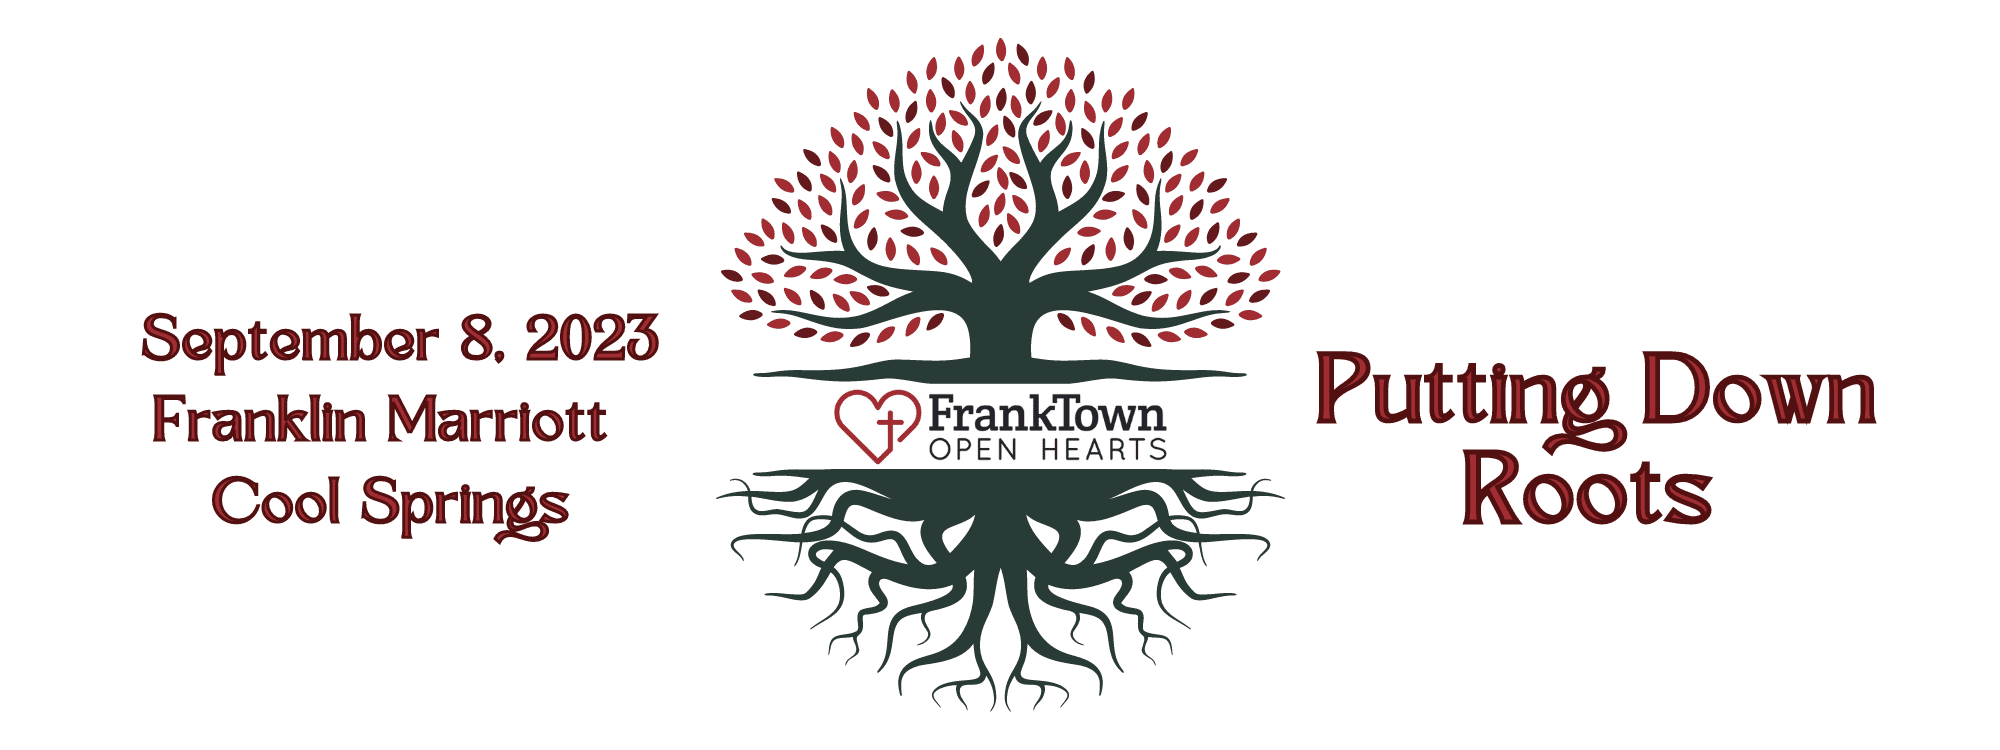 FrankTown Open Hearts Annual Dinner- “Putting Down Roots” Franklin, TN